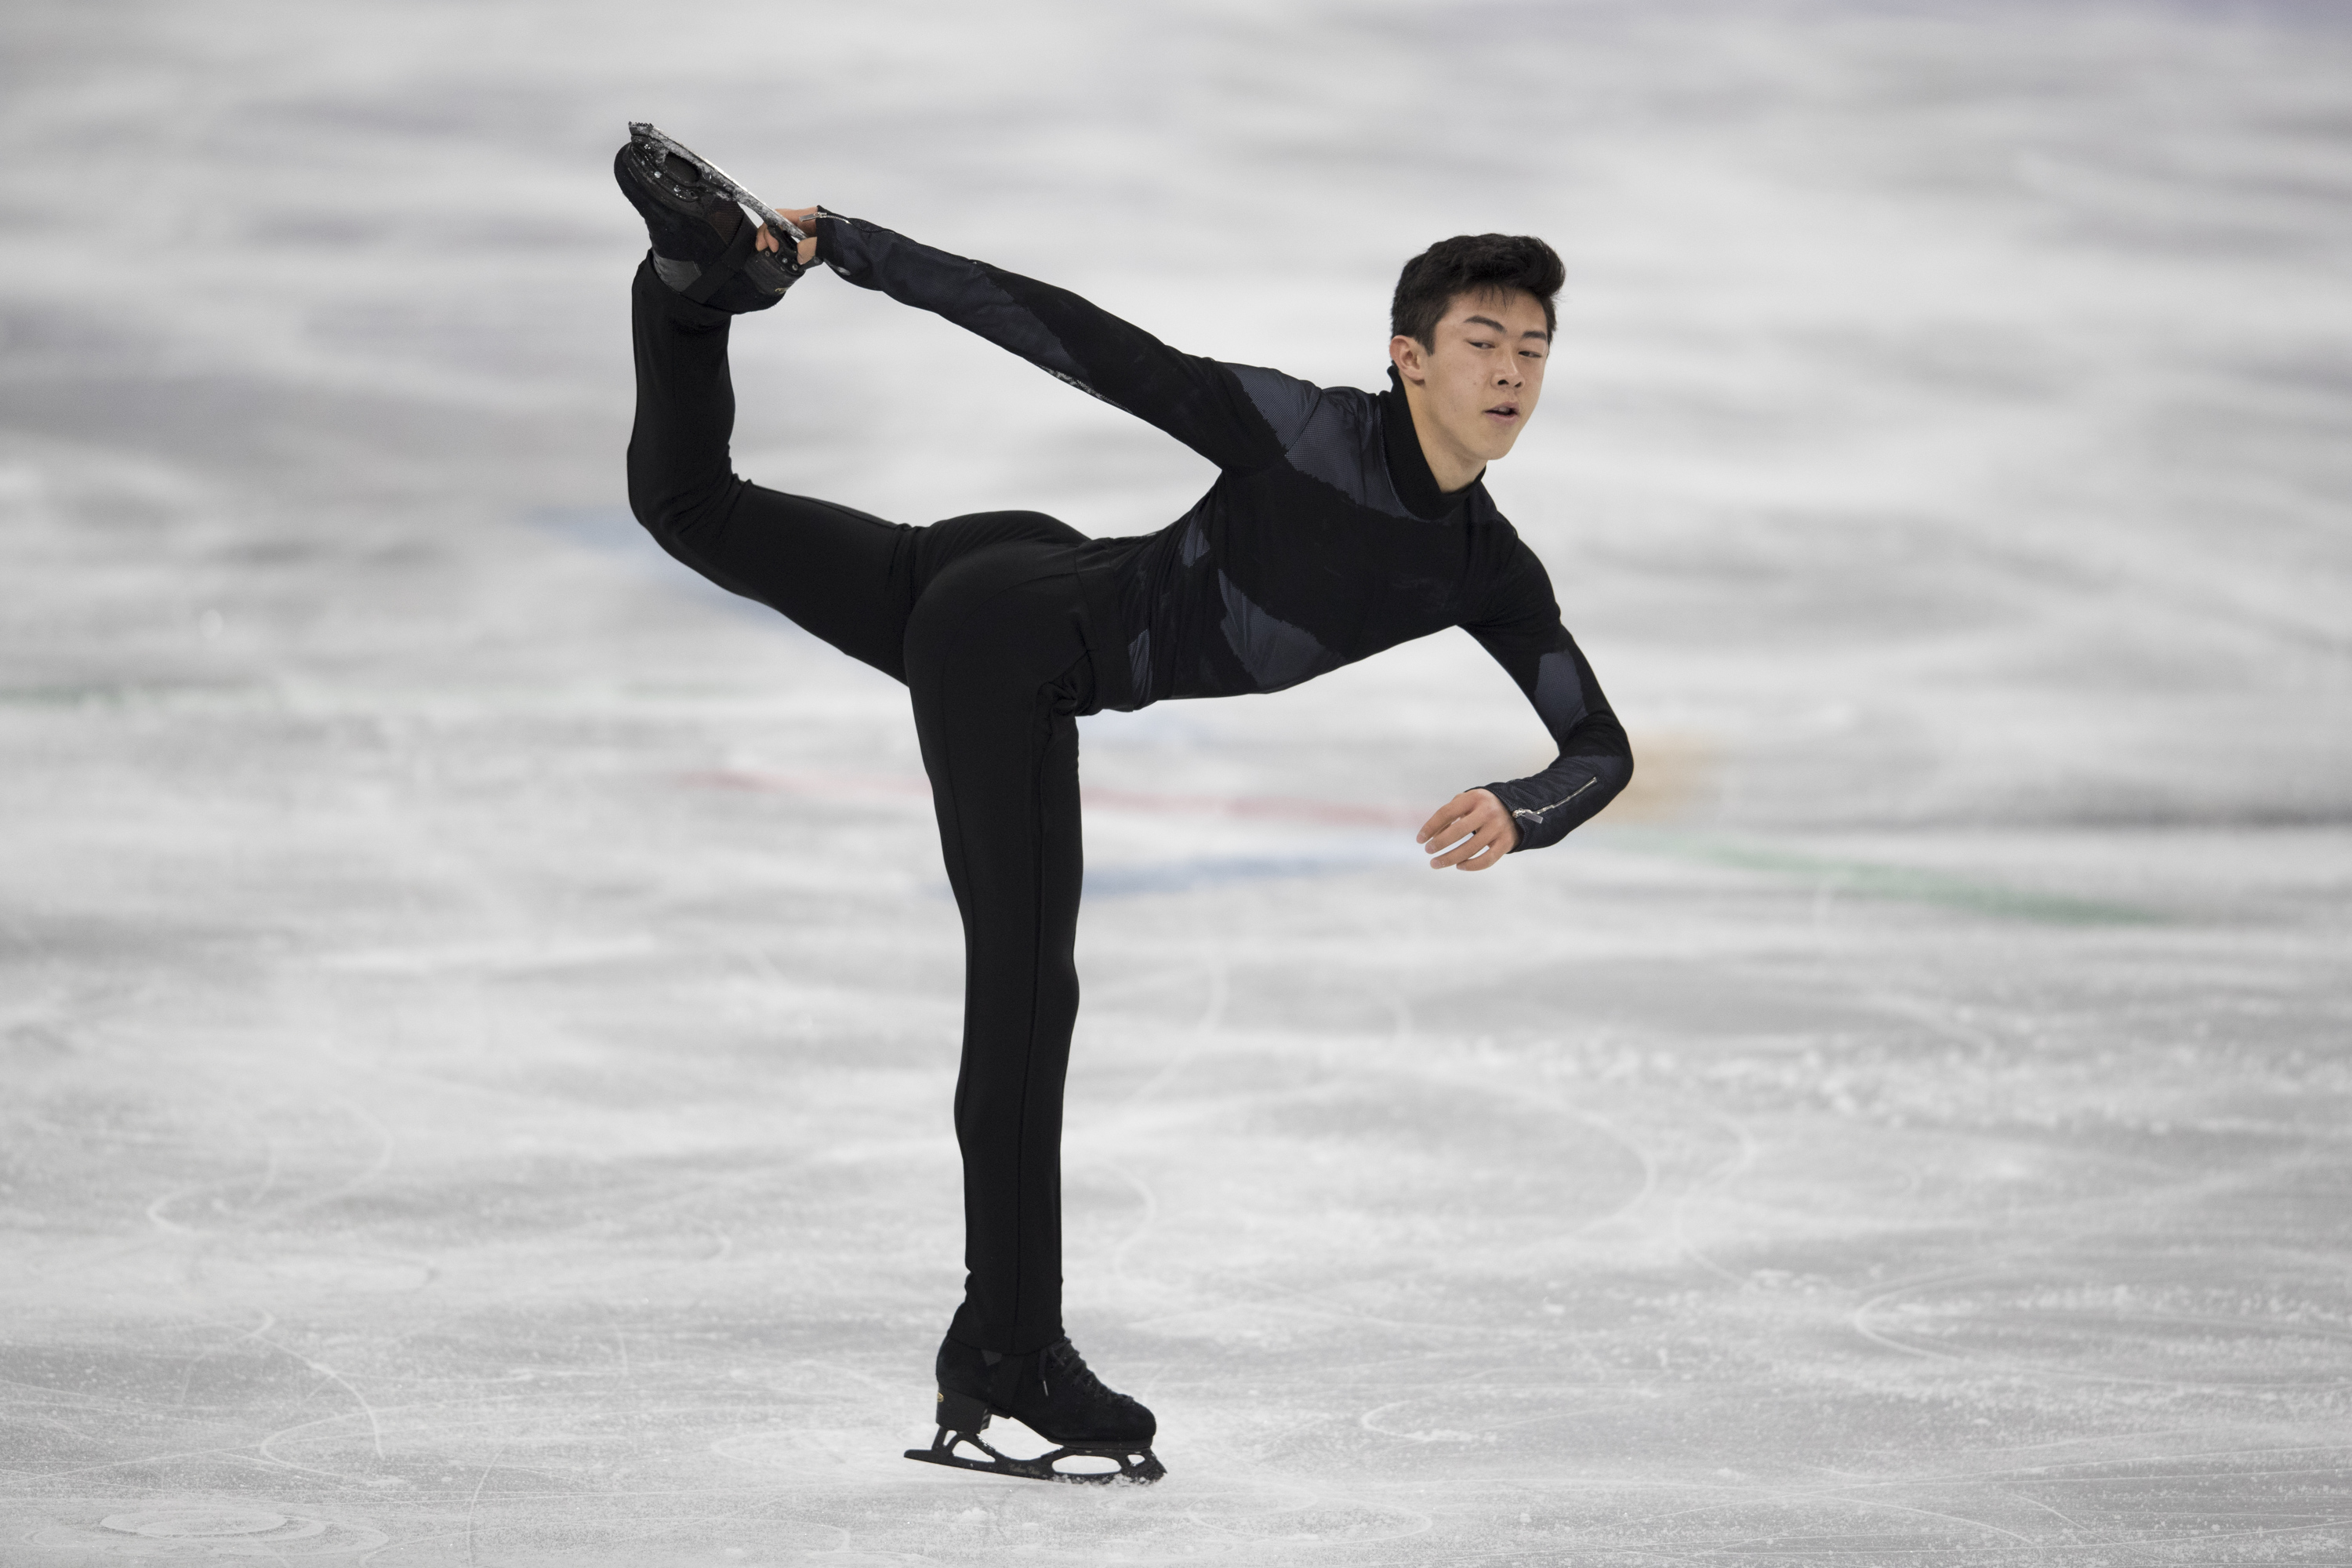 Nathan Chen's Figure Skating Short Program: What to Watch For | Time